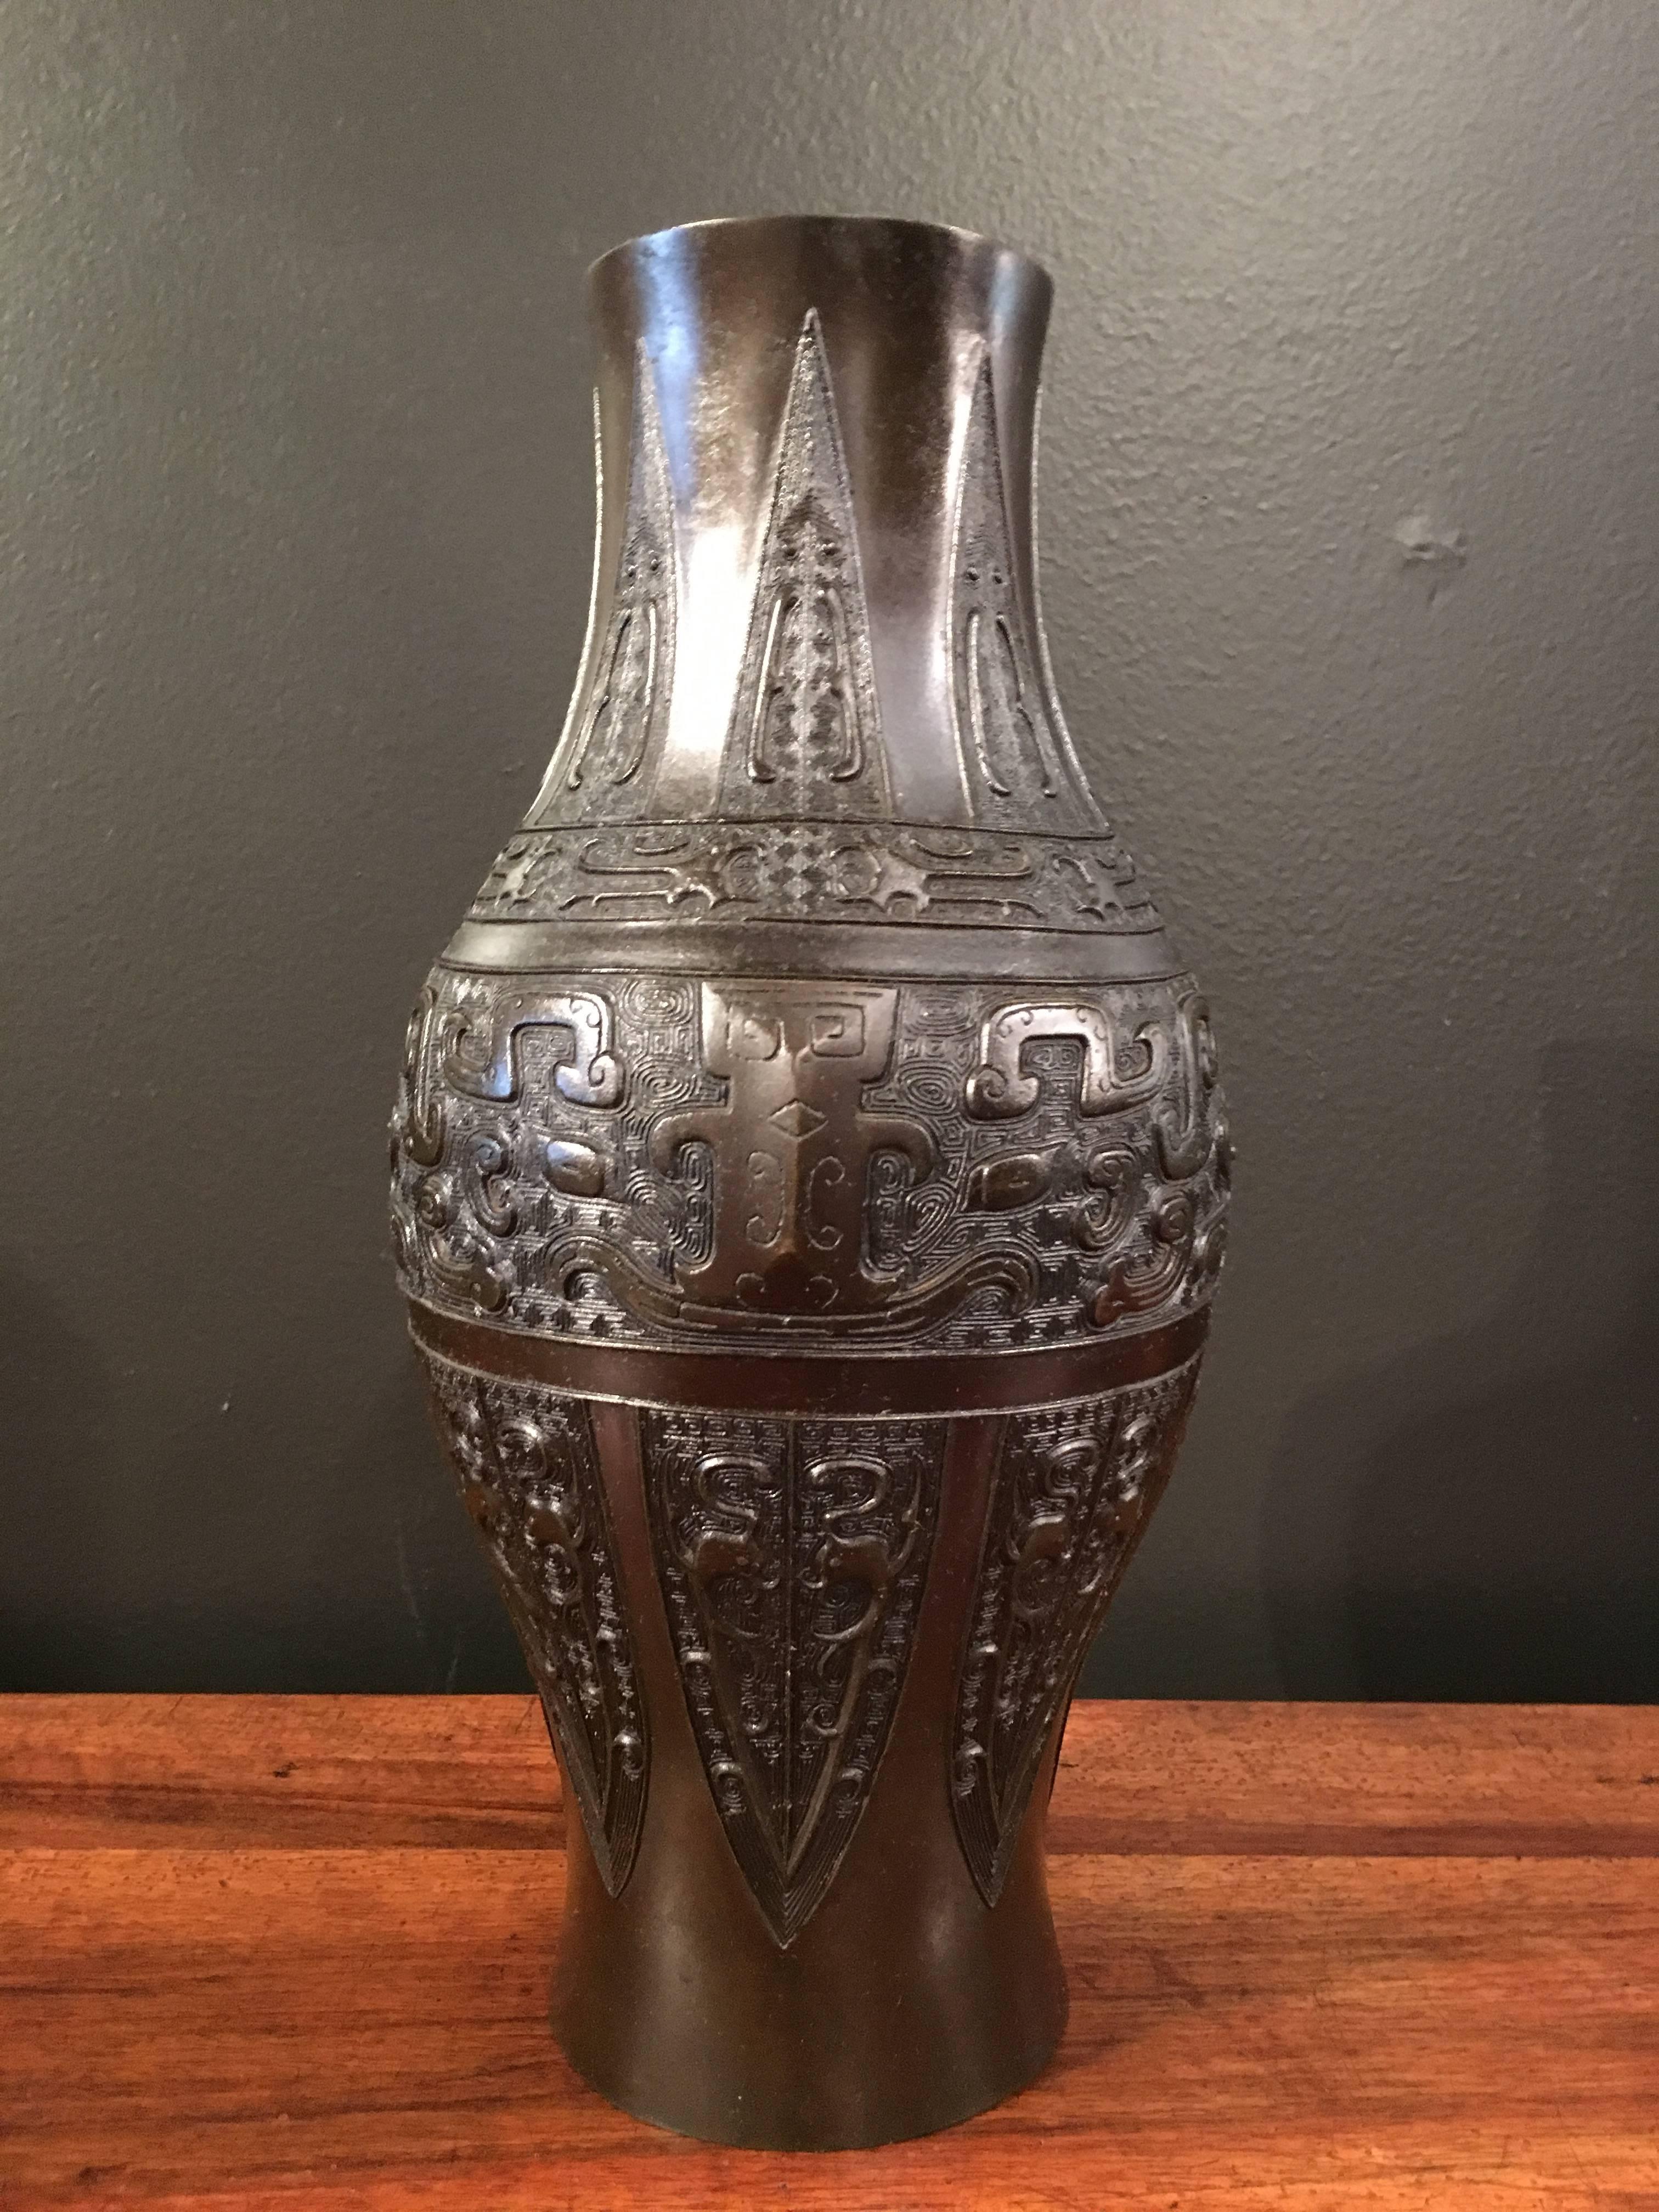 The vase of elegant ovoid baluster form and featuring well cast archaistic designs. 

The main design cast as a pair of large taotie masks set upon a leiwen diaper ground, with a pair of opposing kui dragons on either side of the mask. The upper